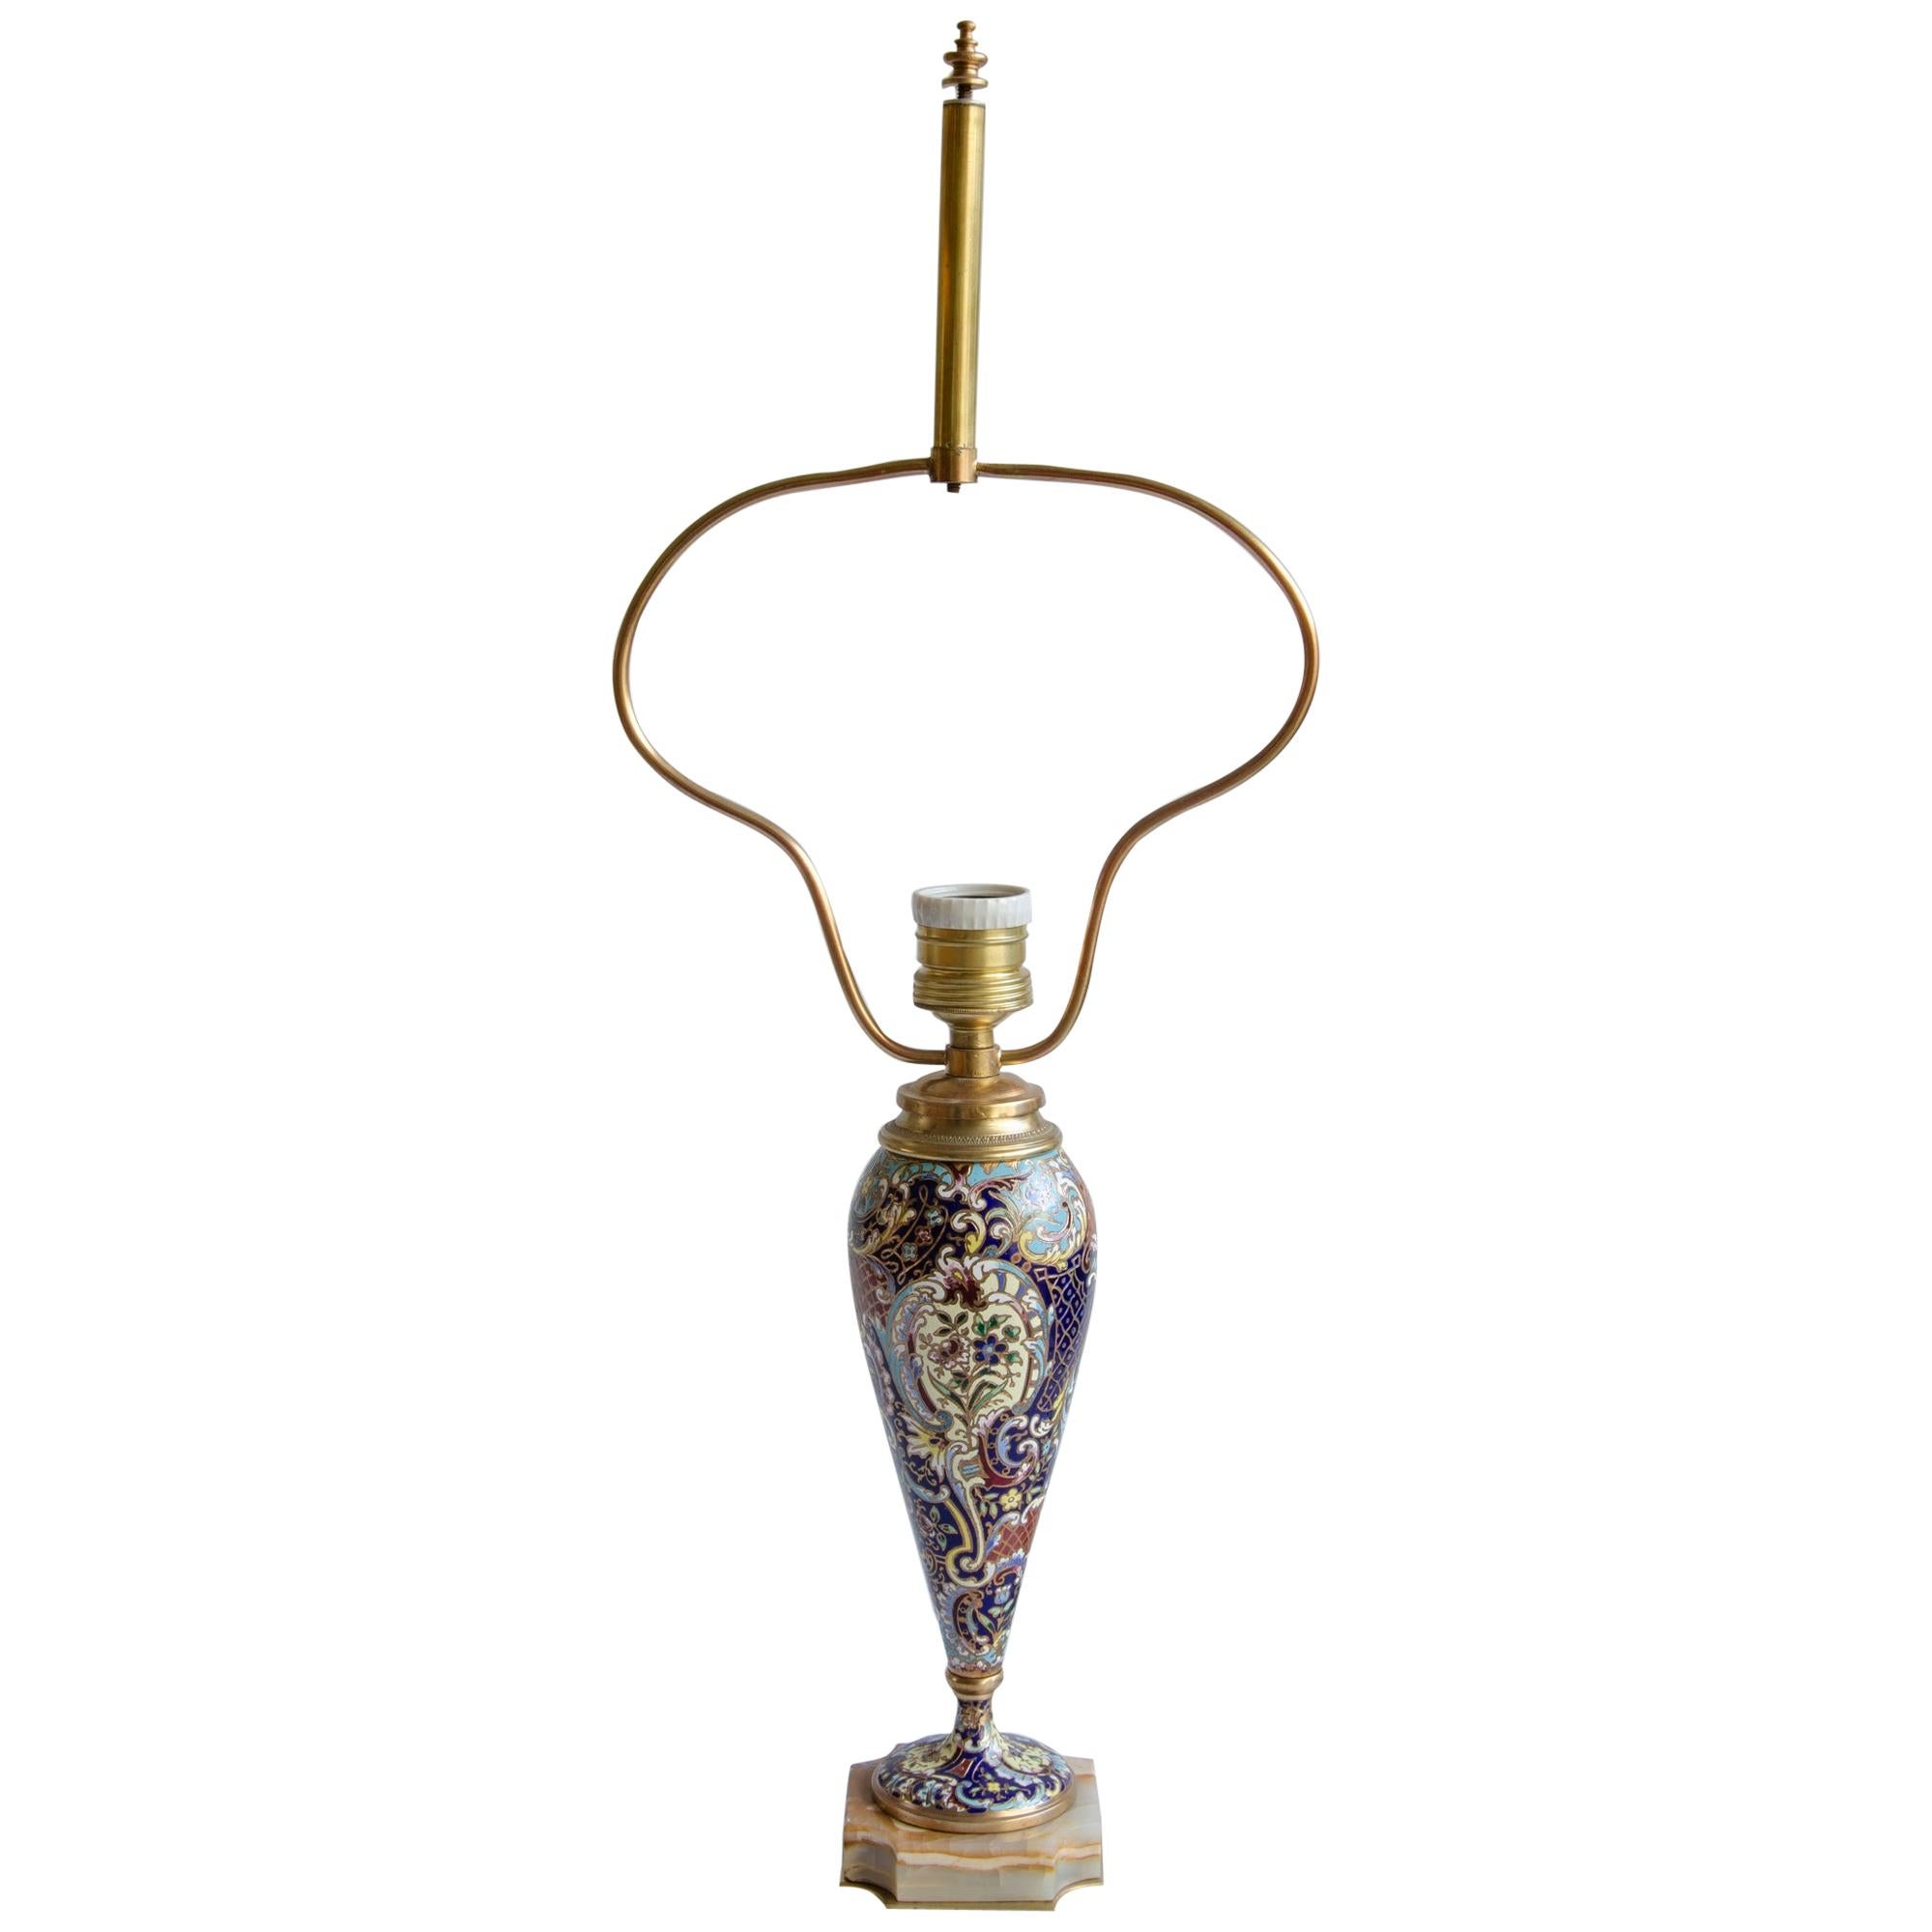 Napoleon III table lamp
onix base, enamel champlevé,
circa 1900 origin France electrified 220 w
perfect condition.
The Napoleon III style had its heyday during the 1850s and 1880s. Emperor Napoleon wanted to emulate the lavishness and elegance of